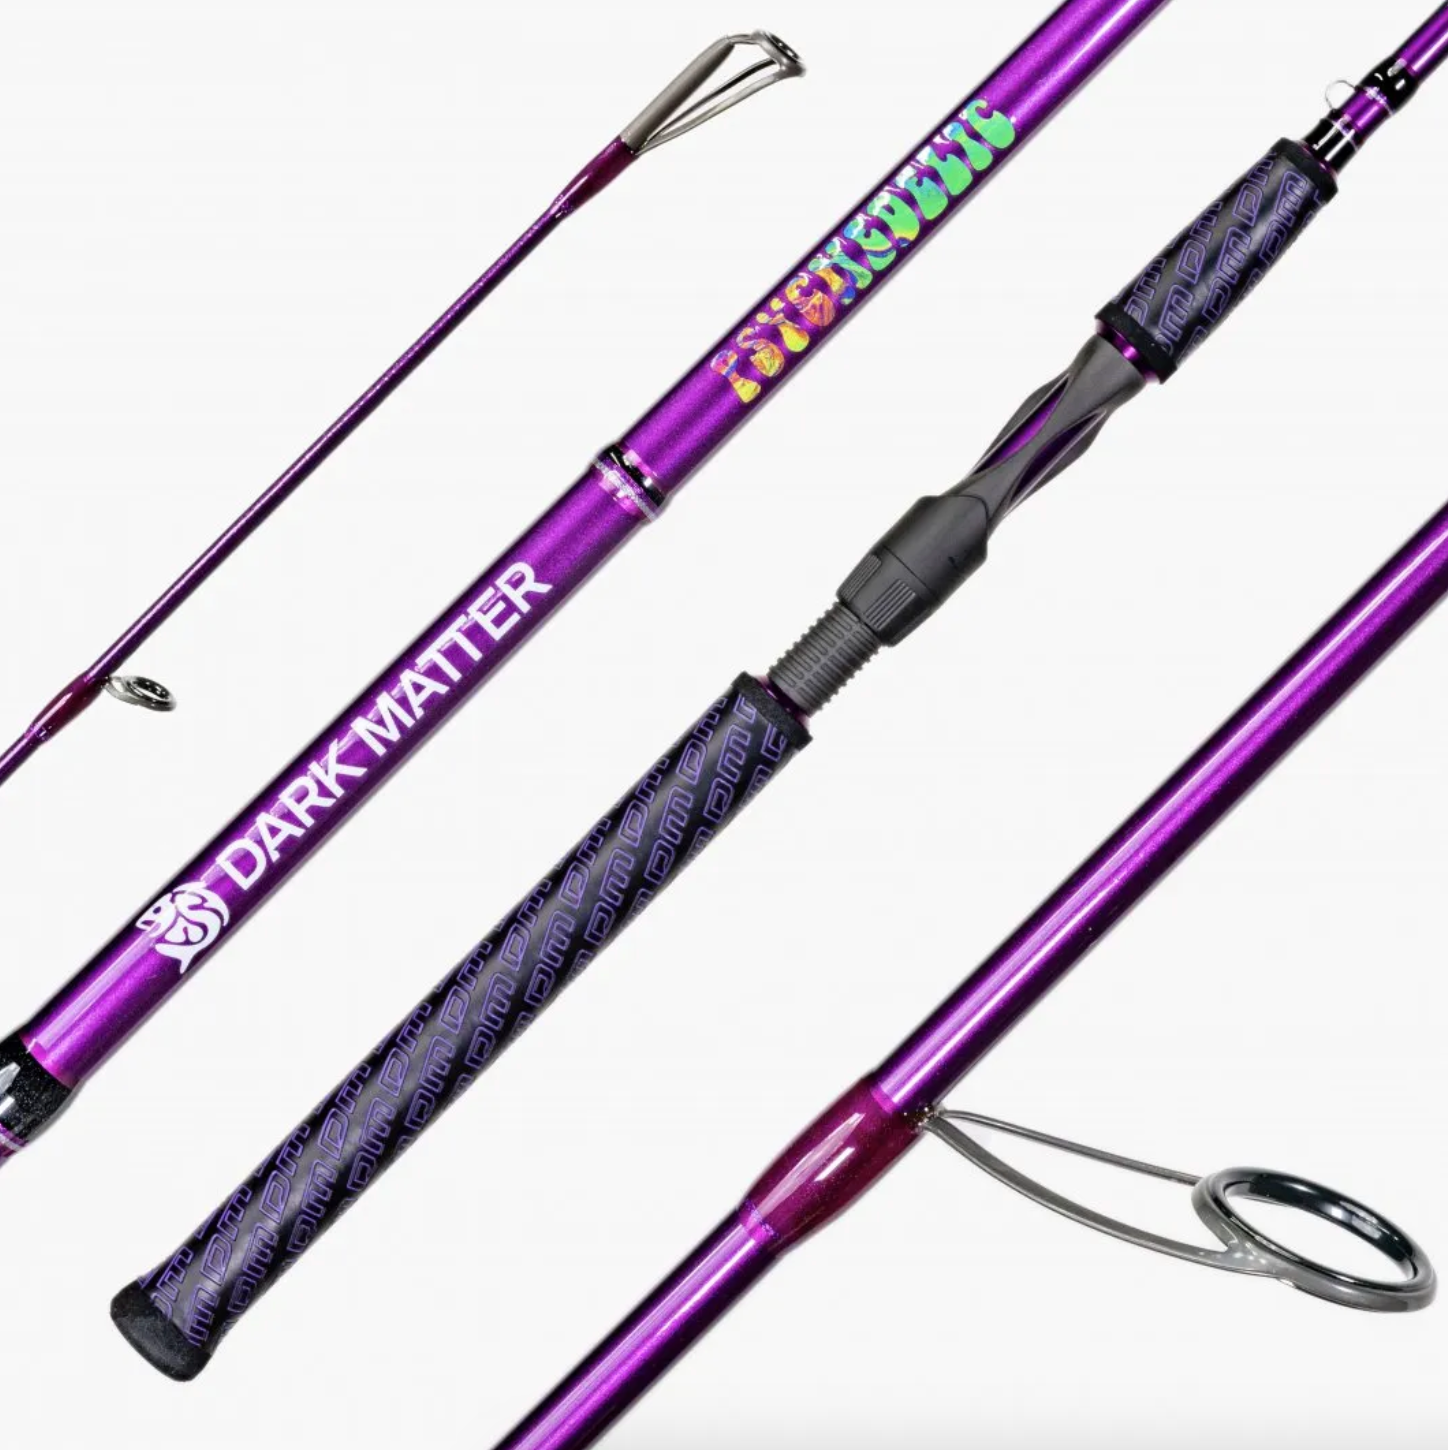 Fishing Made Stylish: Pink and Green Shur Strike Rod and Reel Combo